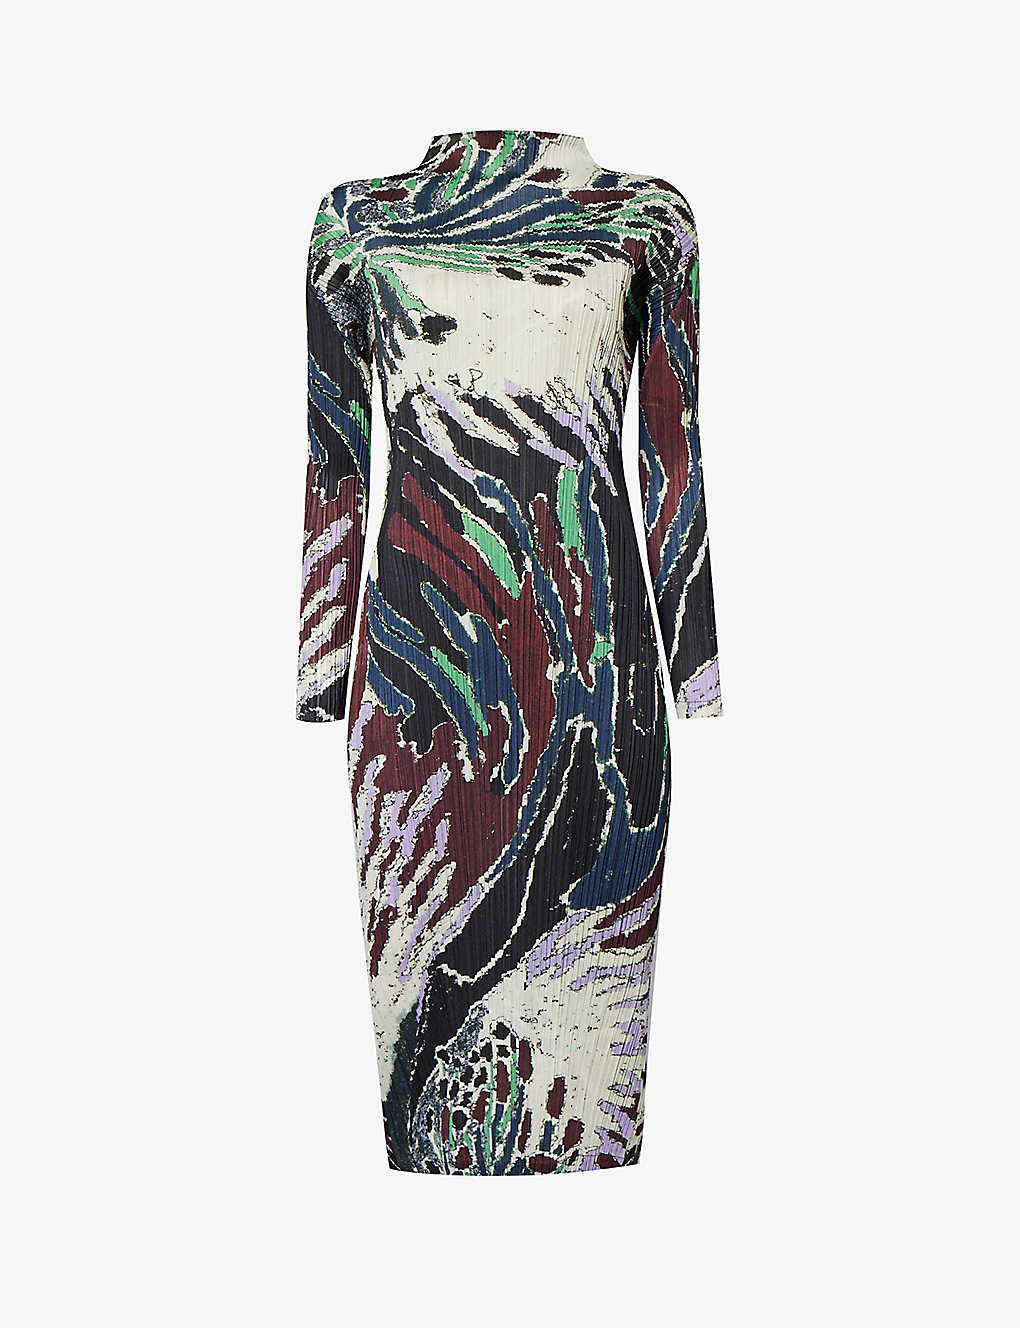 ISSEY MIYAKE PLEATS PLEASE ISSEY MIYAKE WOMEN'S BLACK FROSTY FOREST ABSTRACT-PATTERN KNITTED MIDI DRESS